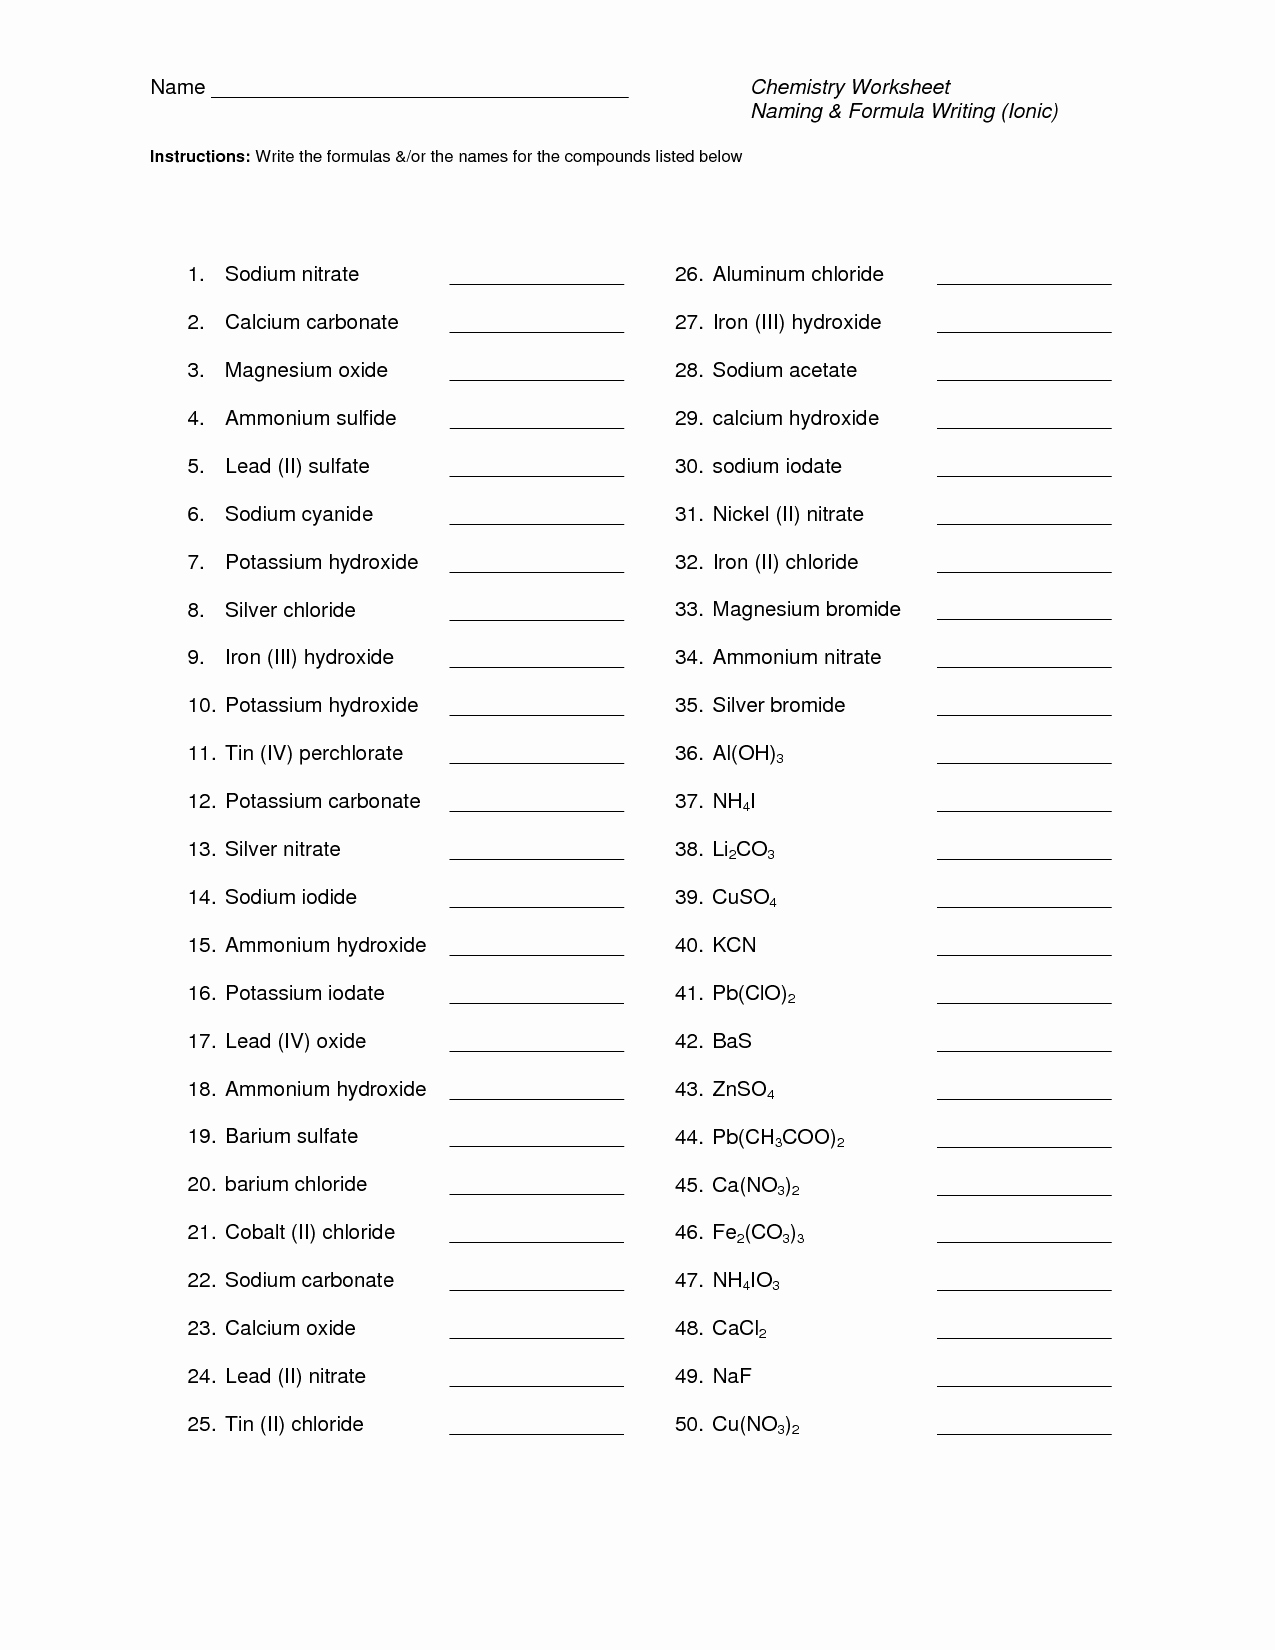 Molecules and Compounds Worksheet Fresh Best 25 Naming Pounds Worksheet Ideas On Pinterest